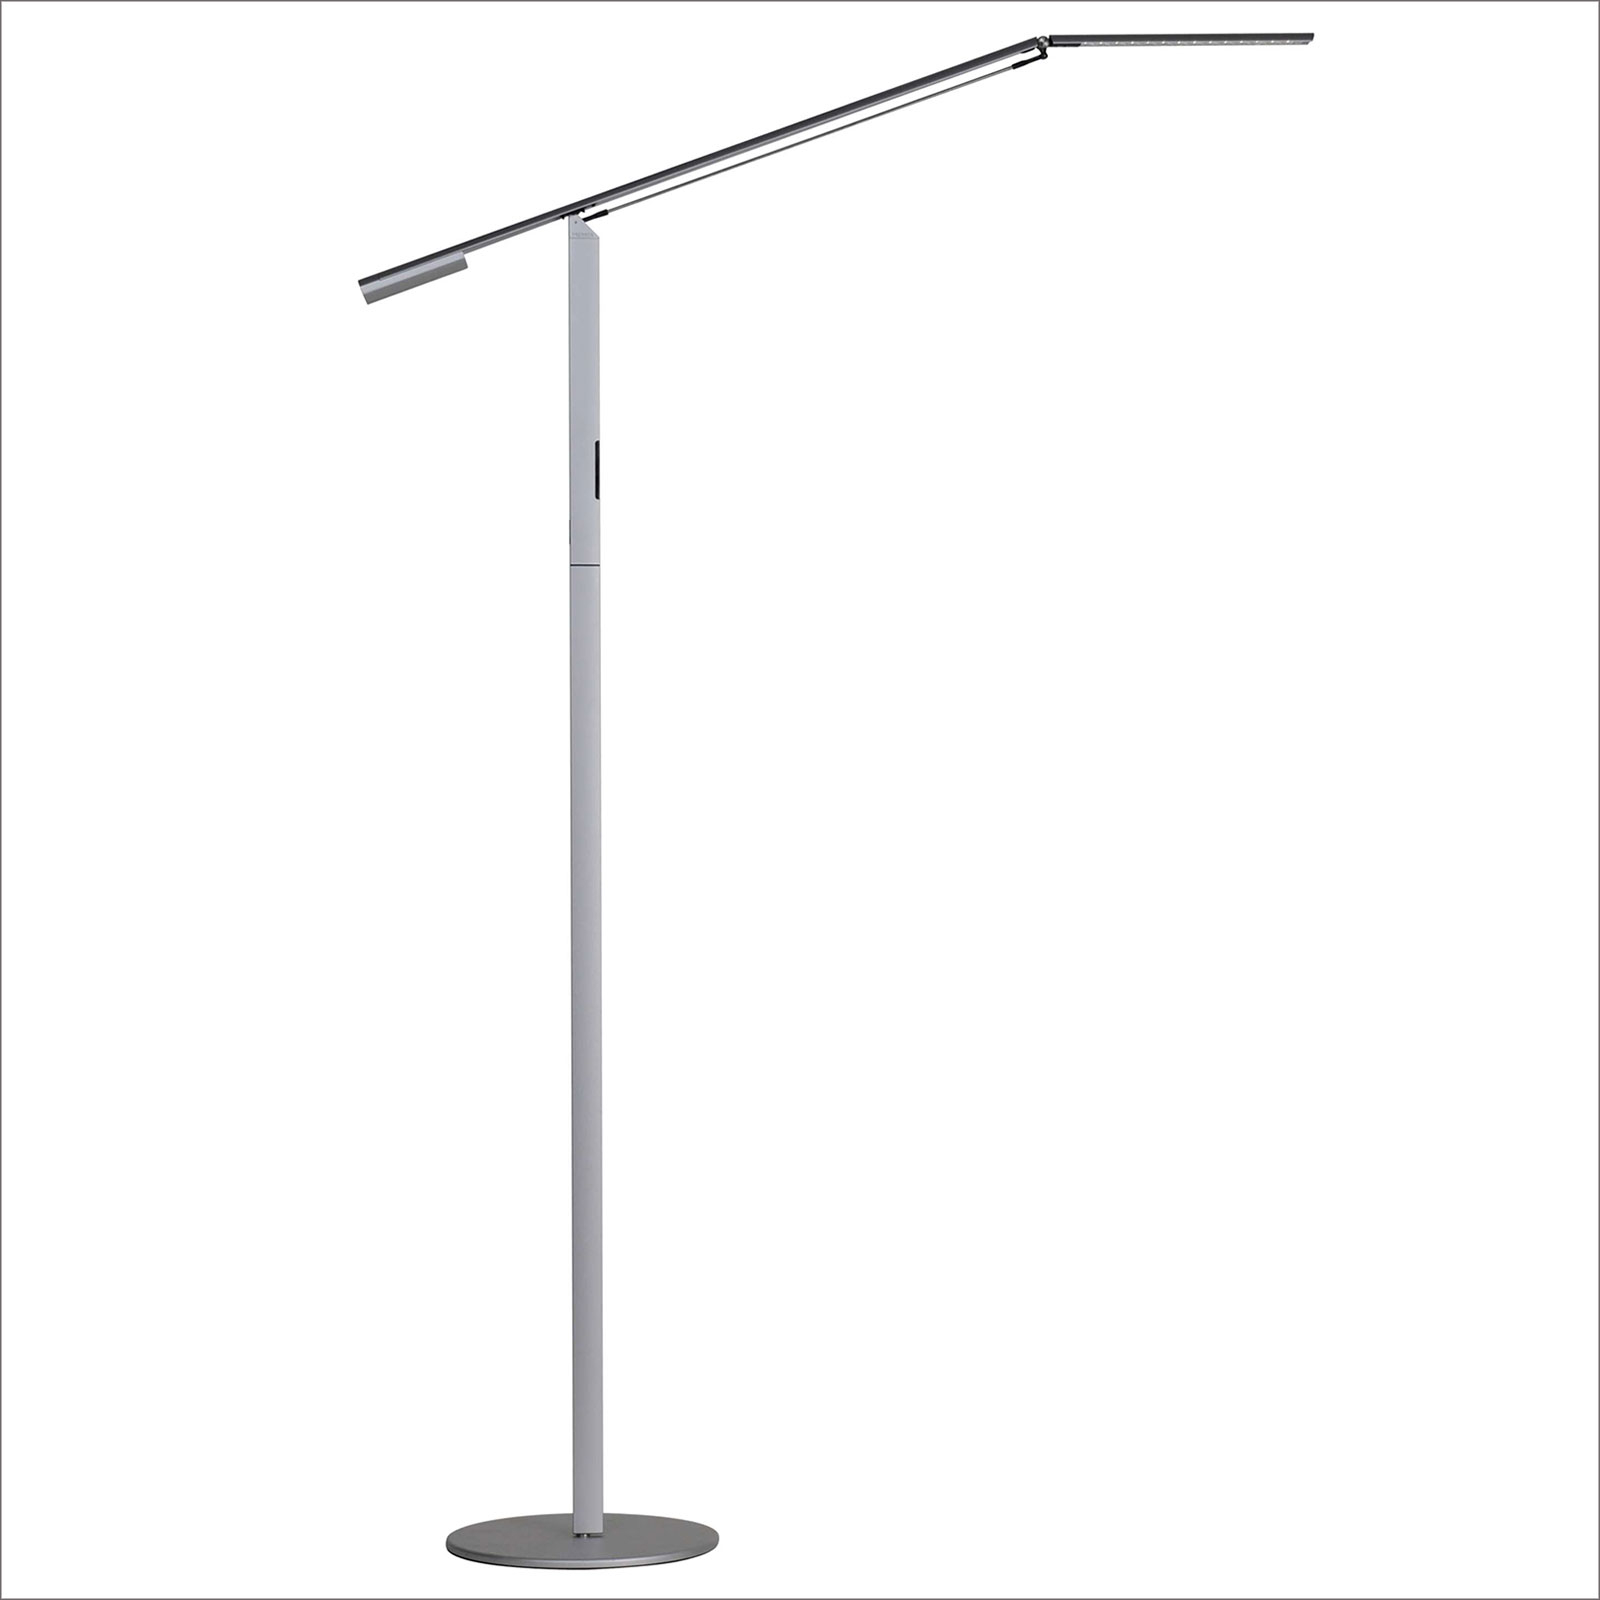 Equo Standing Lamp Trader Boys Office Furniture intended for size 1600 X 1600